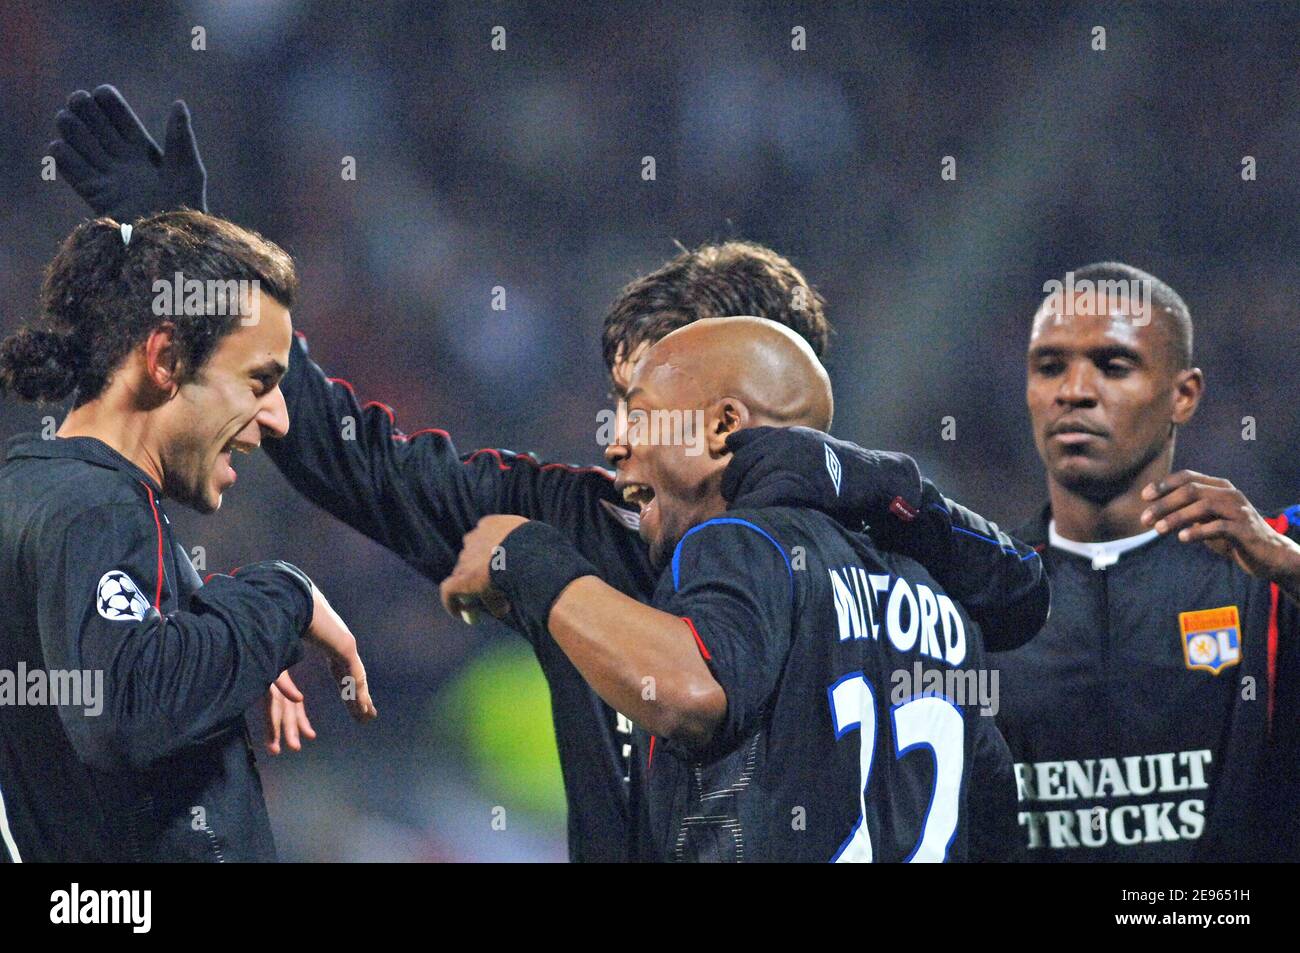 Olympic Lyonnais' Sylvain Wiltord celebrates his goal with team mate Juninho and Fred during the UEFA Champions league match, OLympic Lyonnais vs PSV Eindhoven at stade Gerland in Lyon, France on March 8, 2006. Olympic Lyonnais won 4-0. Photo by Stephane Kempinaire/Cameleon/ABACAPRESS.COM Stock Photo